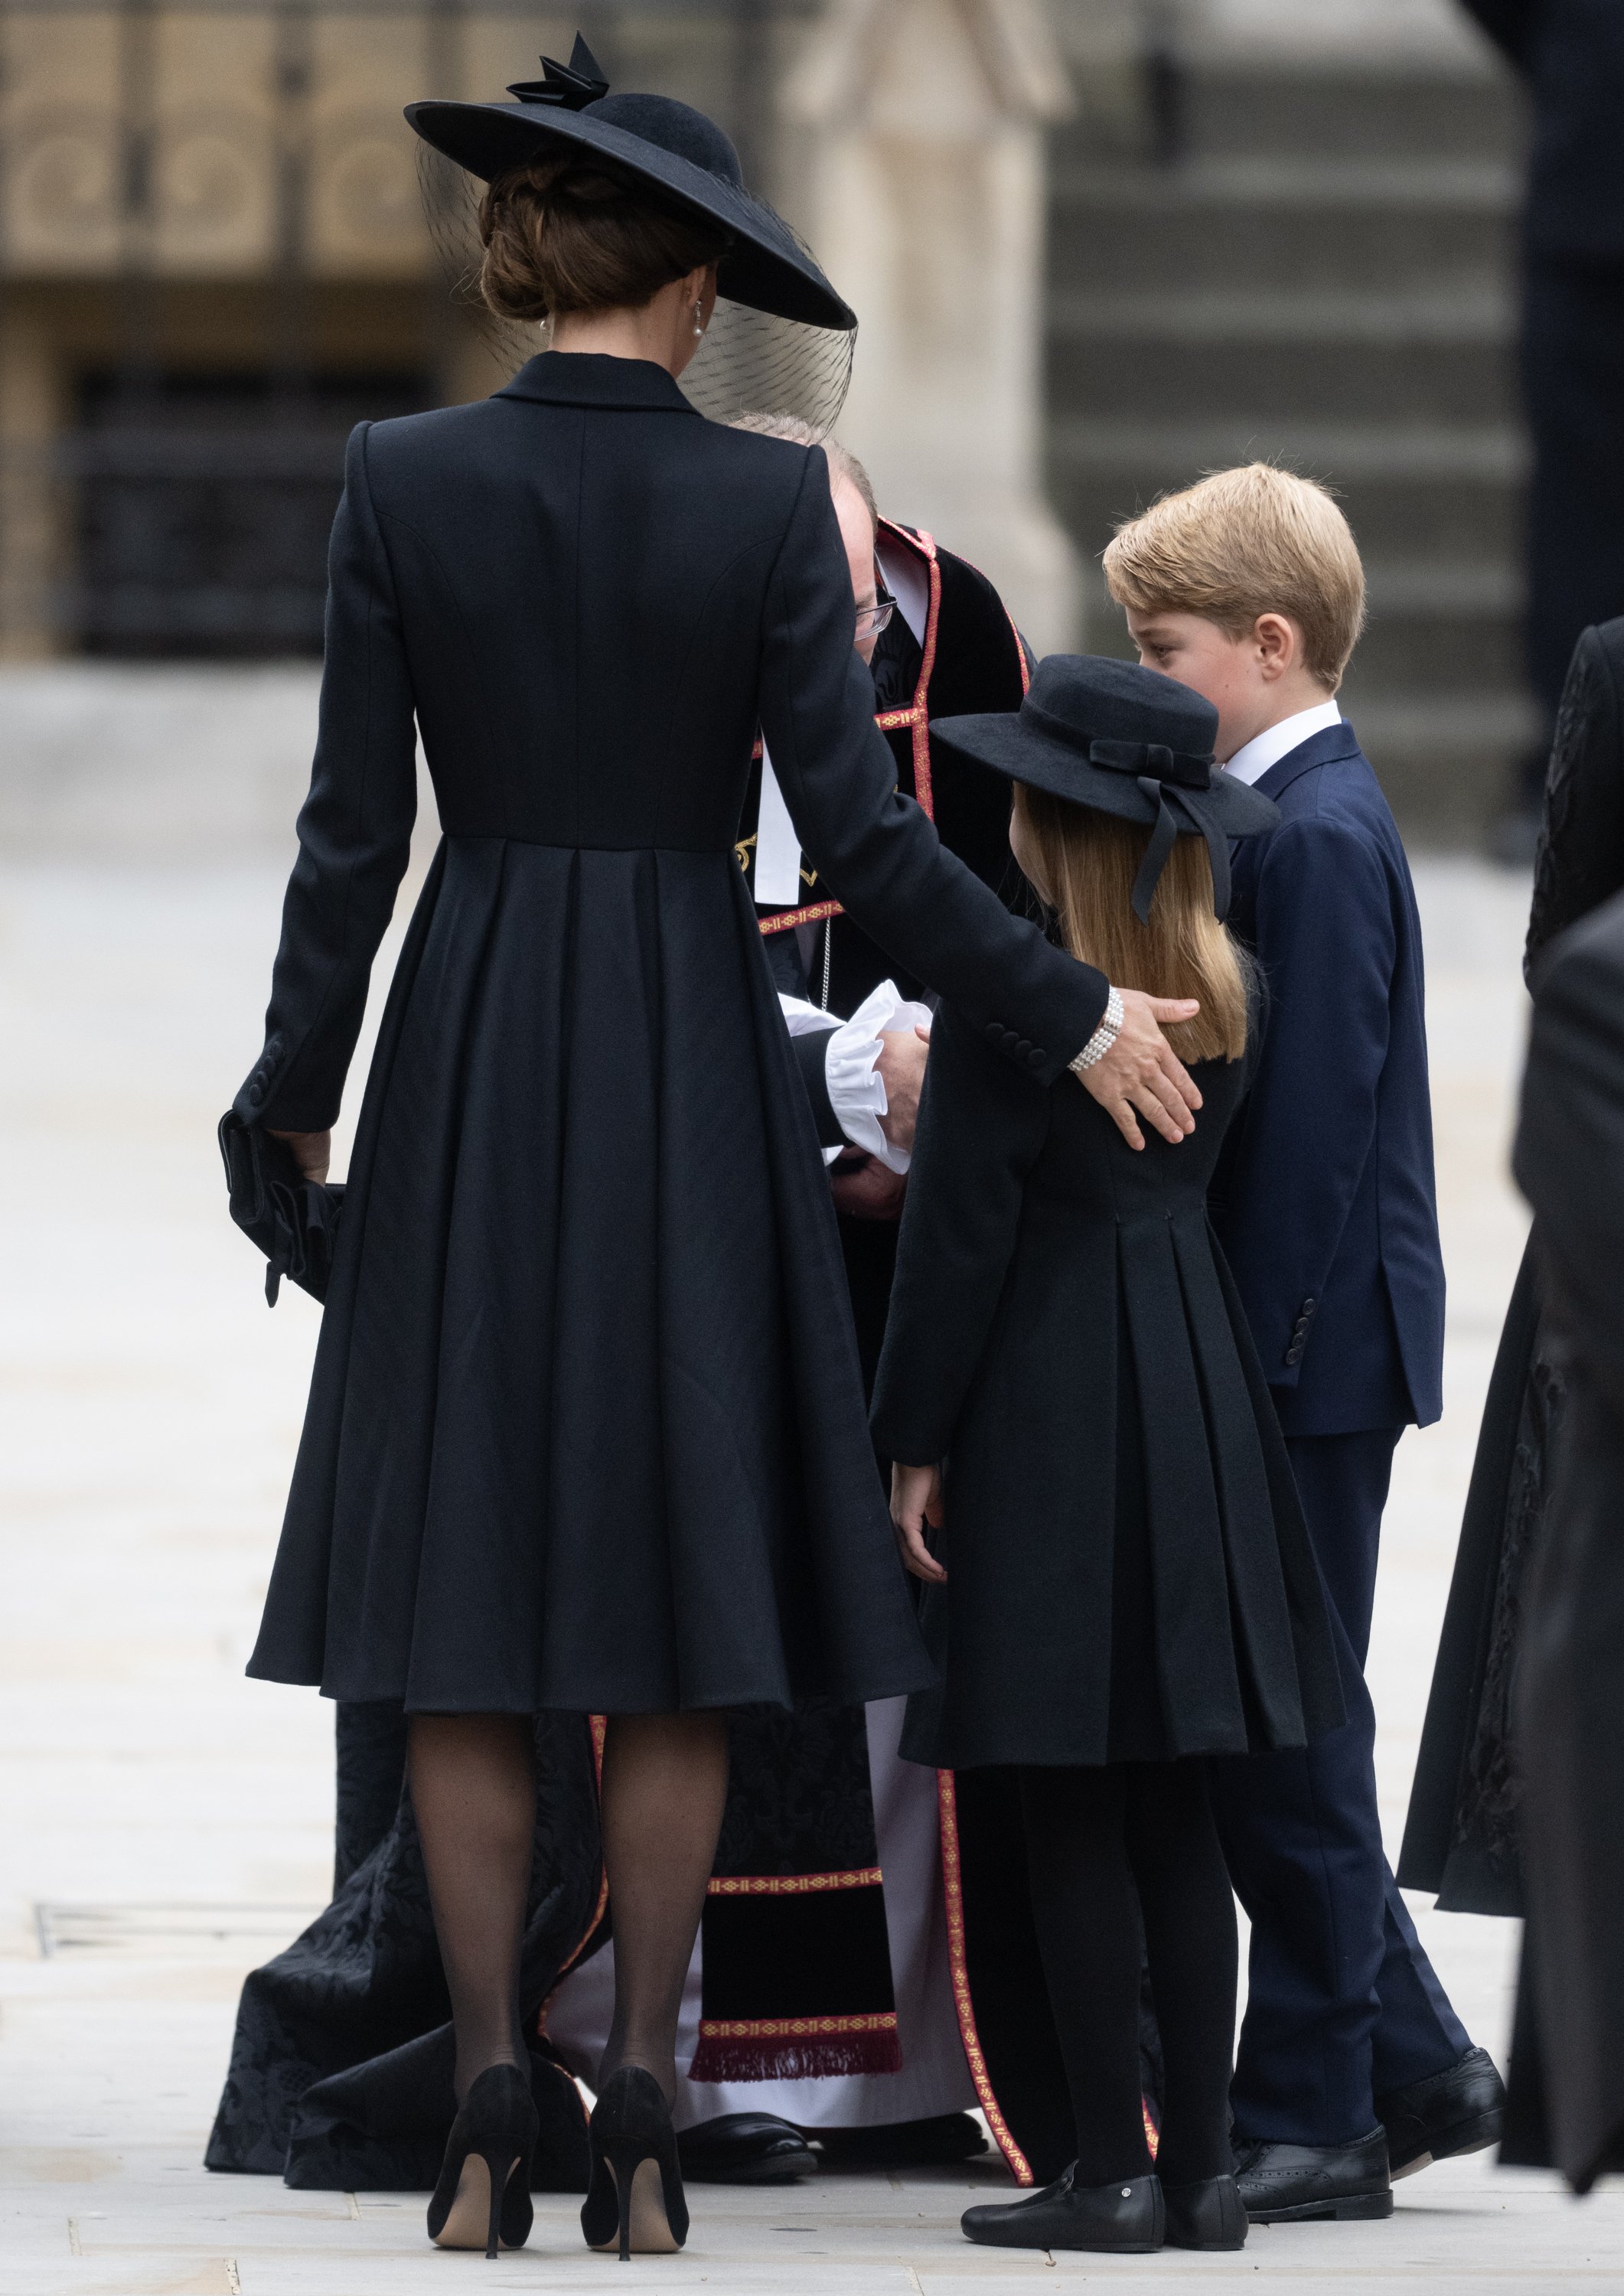 Catherine, Princess of Wales, Prince George and Princess Charlotte during the State Funeral of Queen Elizabeth II at Westminster Abbey on September 19, 2022 in London, England. | Source: Getty Images